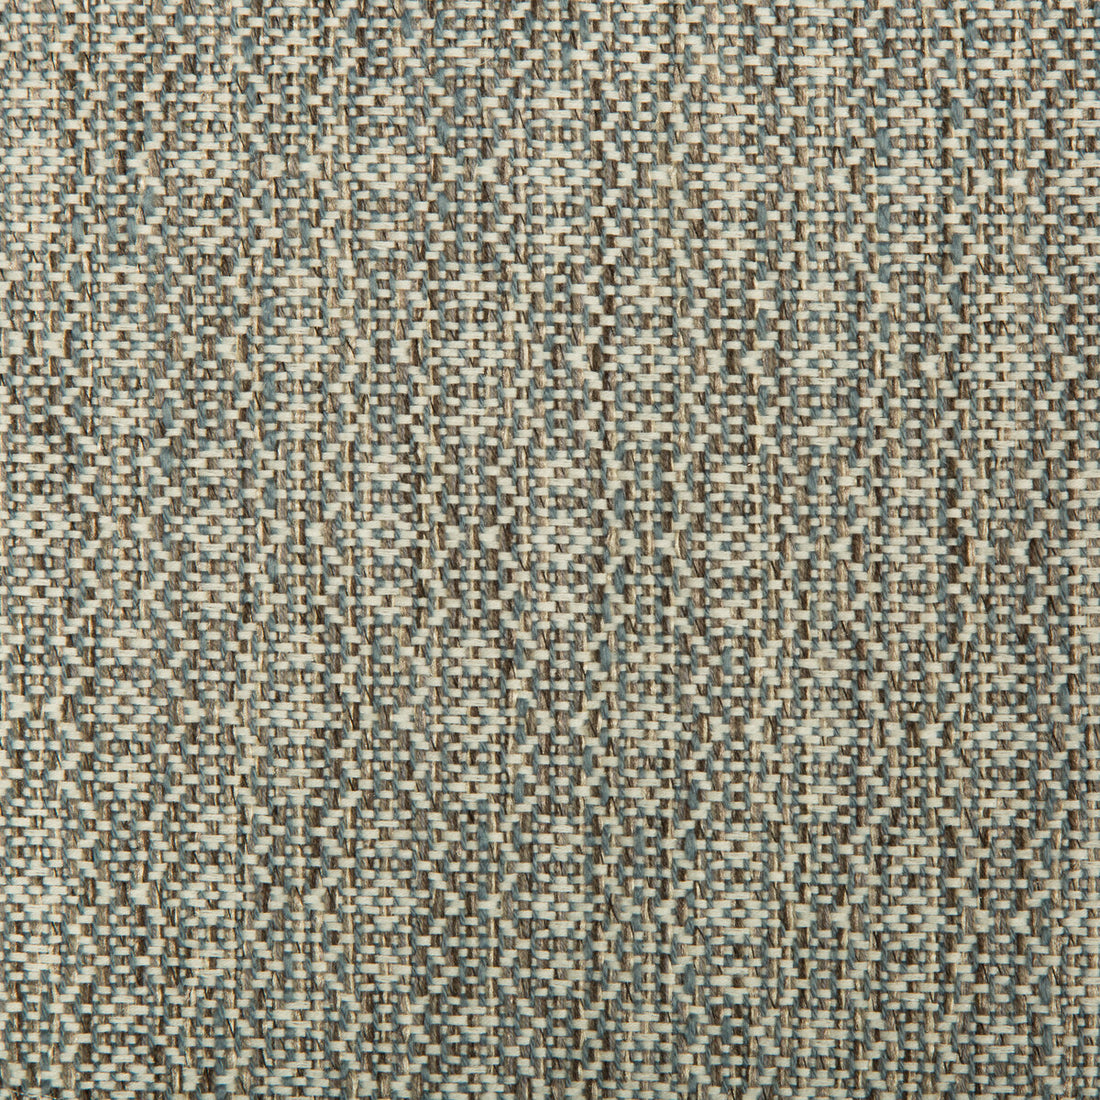 Kravet Contract fabric in 34630-516 color - pattern 34630.516.0 - by Kravet Contract in the Crypton Incase collection